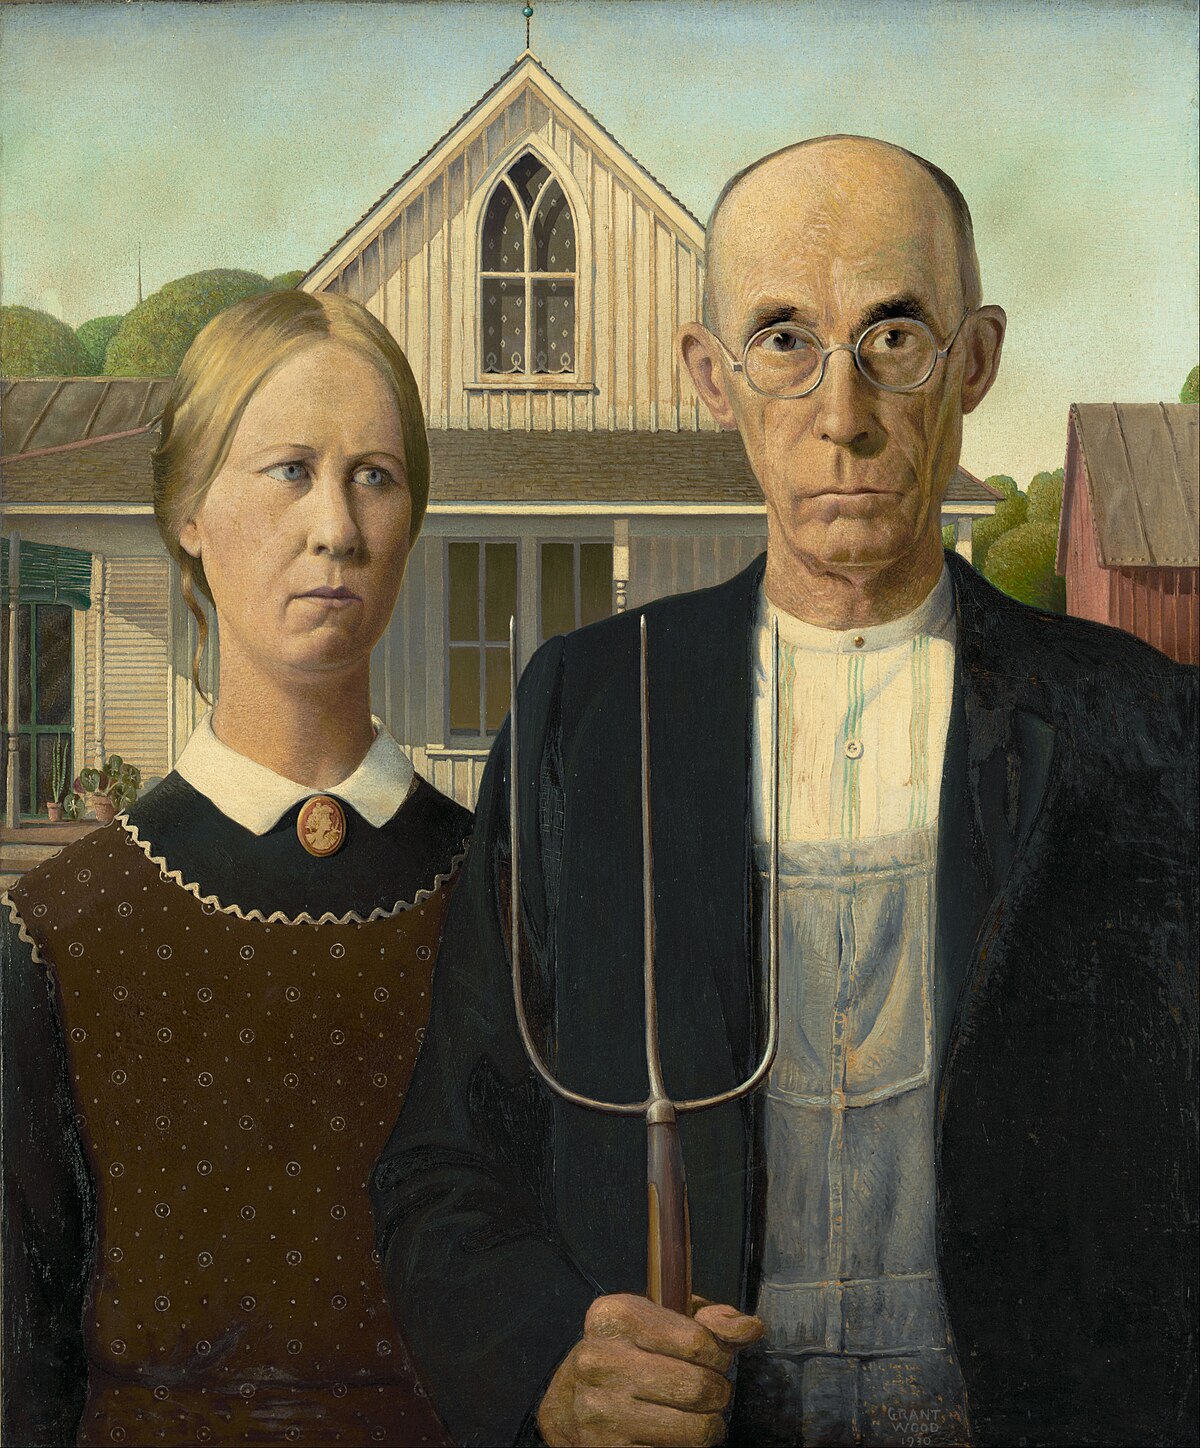 American Gothic, 1930 by Grant Wood.